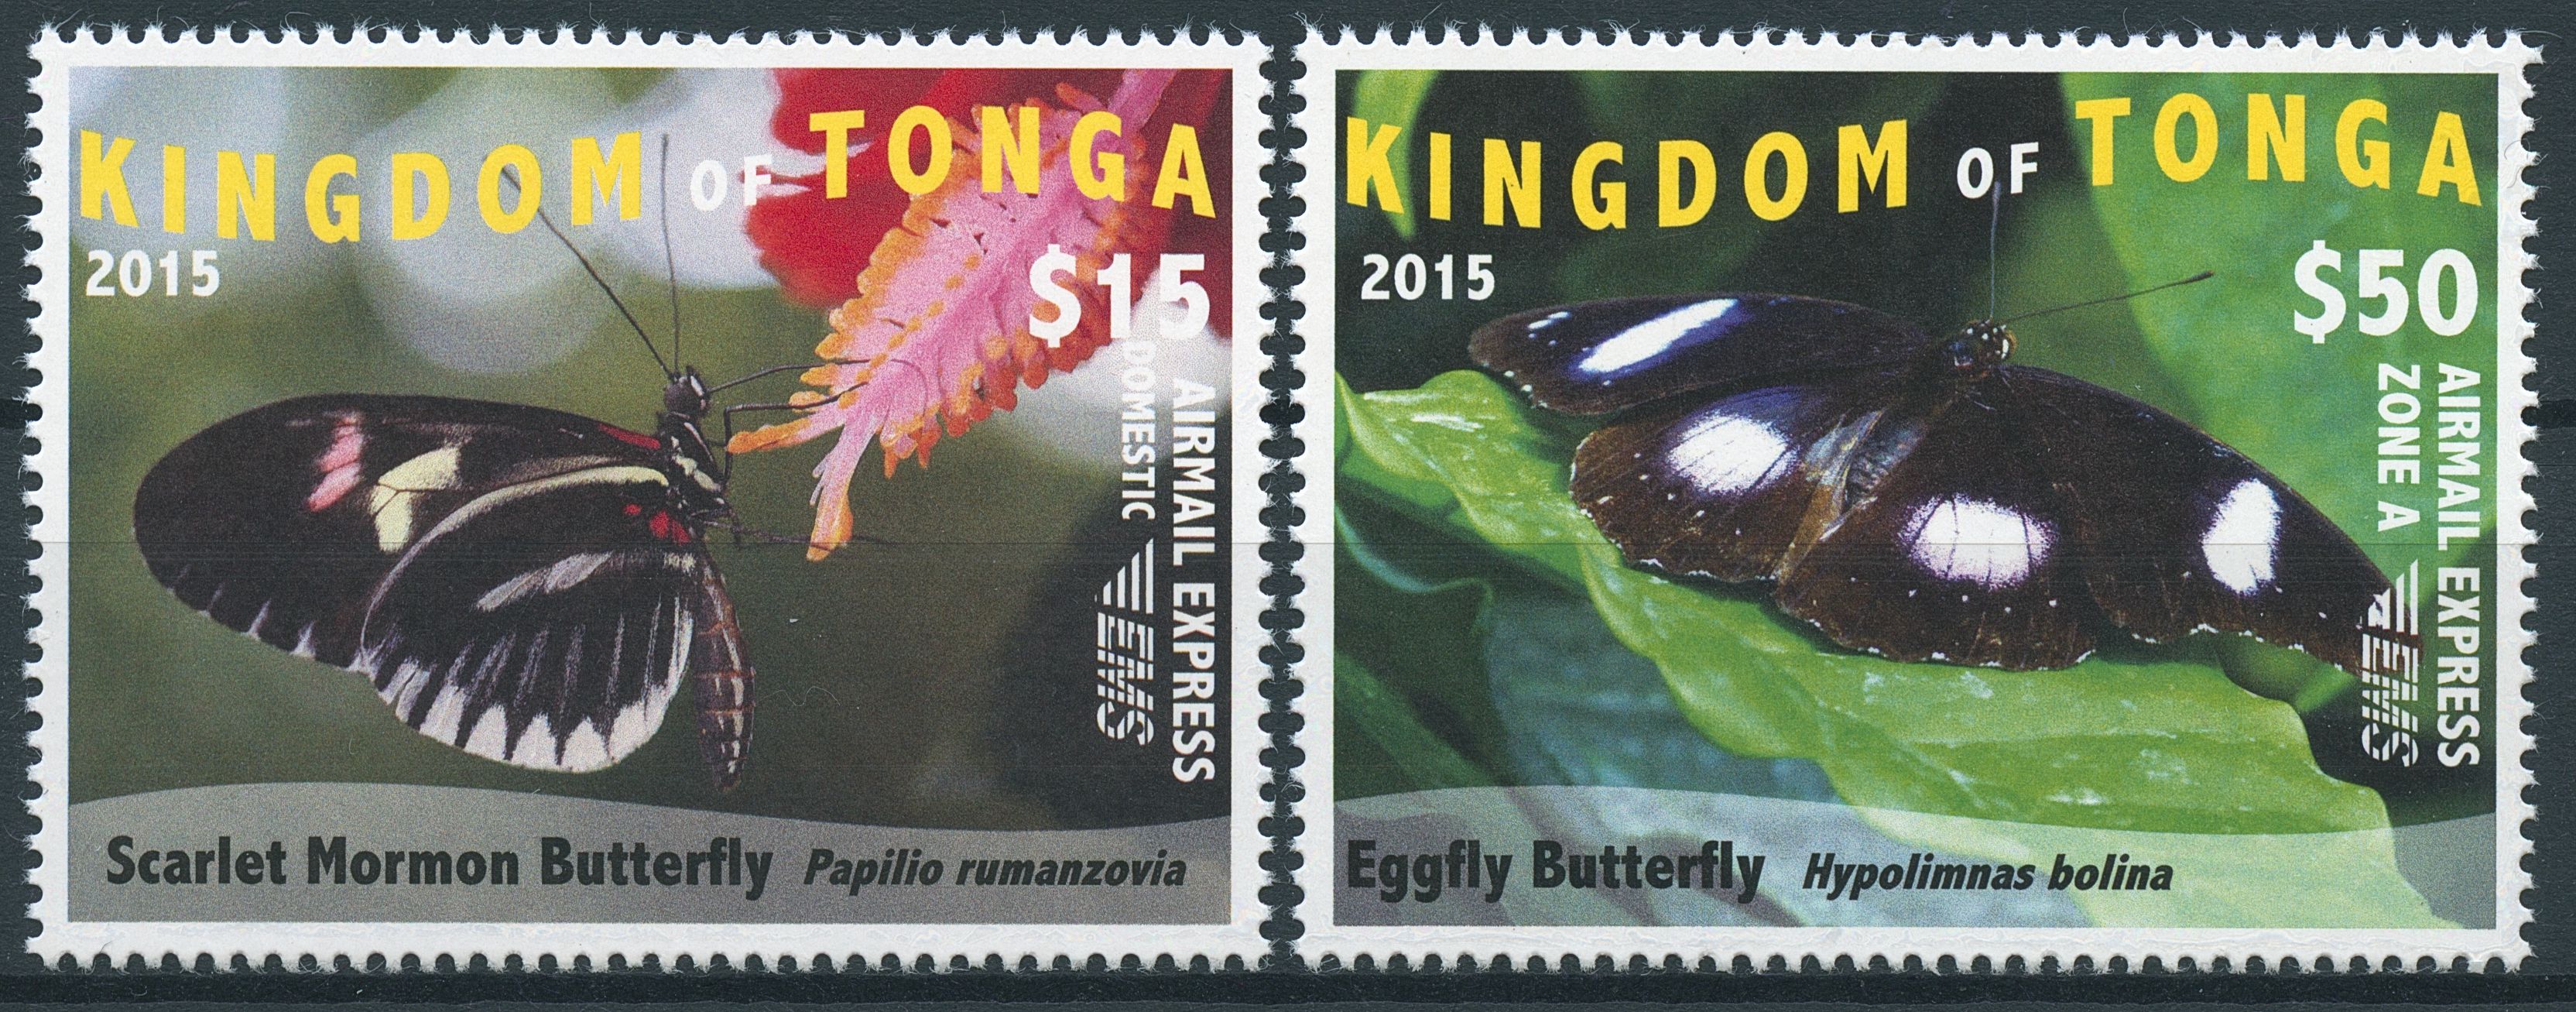 Tonga 2015 MNH EMS Part 1 Butterflies 2v Set Insects Scarlet Mormon Butterfly